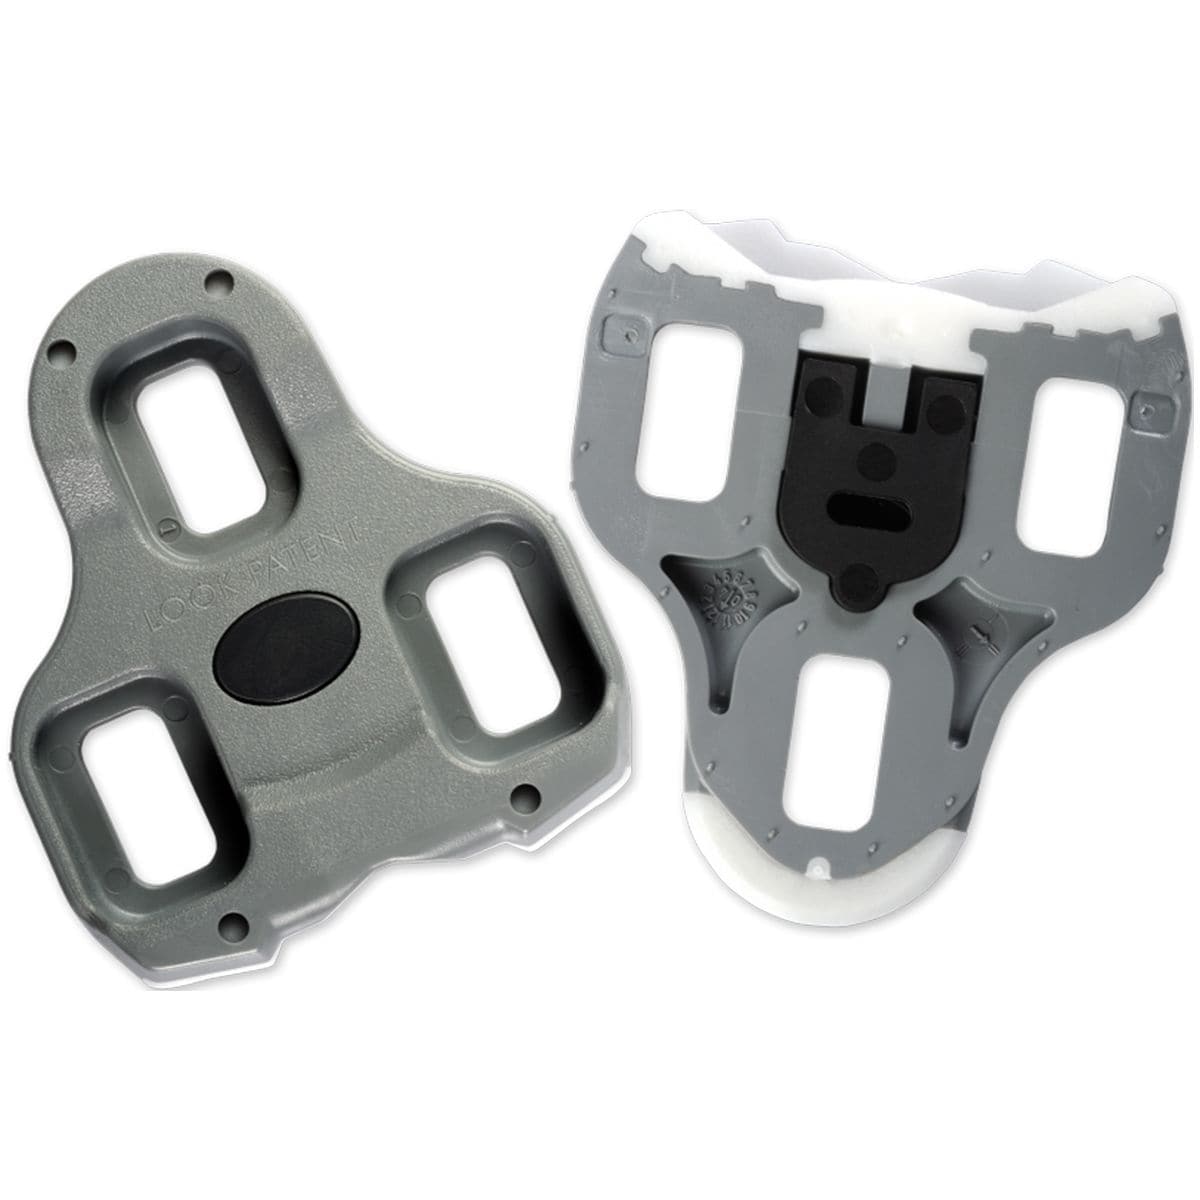 Look Cycle Keo Road Cleat | Backcountry.com